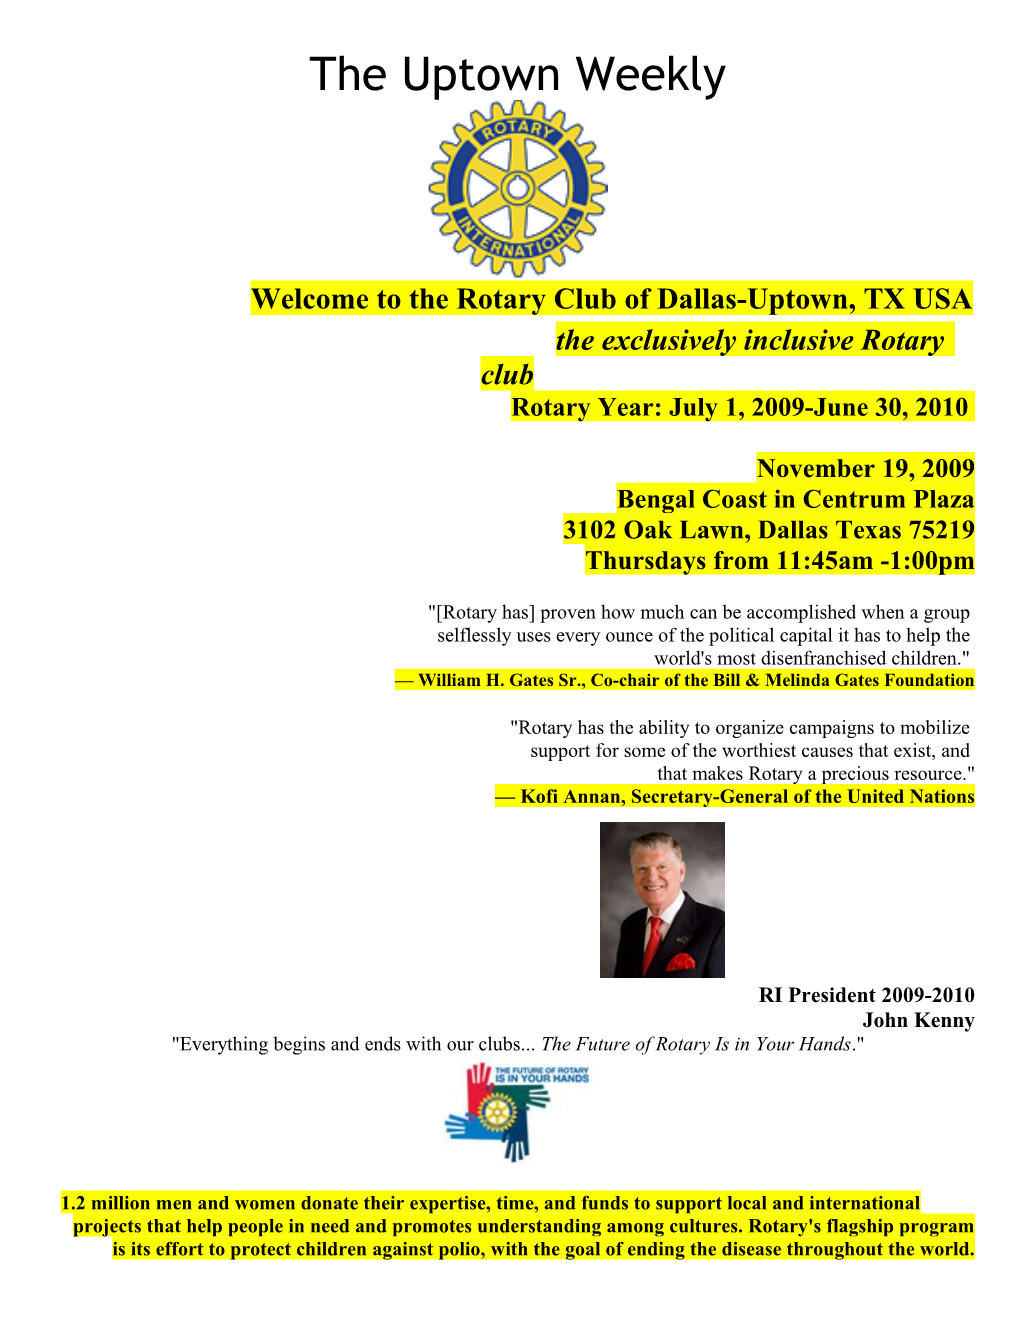 Welcome to the Rotary Club of Dallas-Uptown, TX USA s7